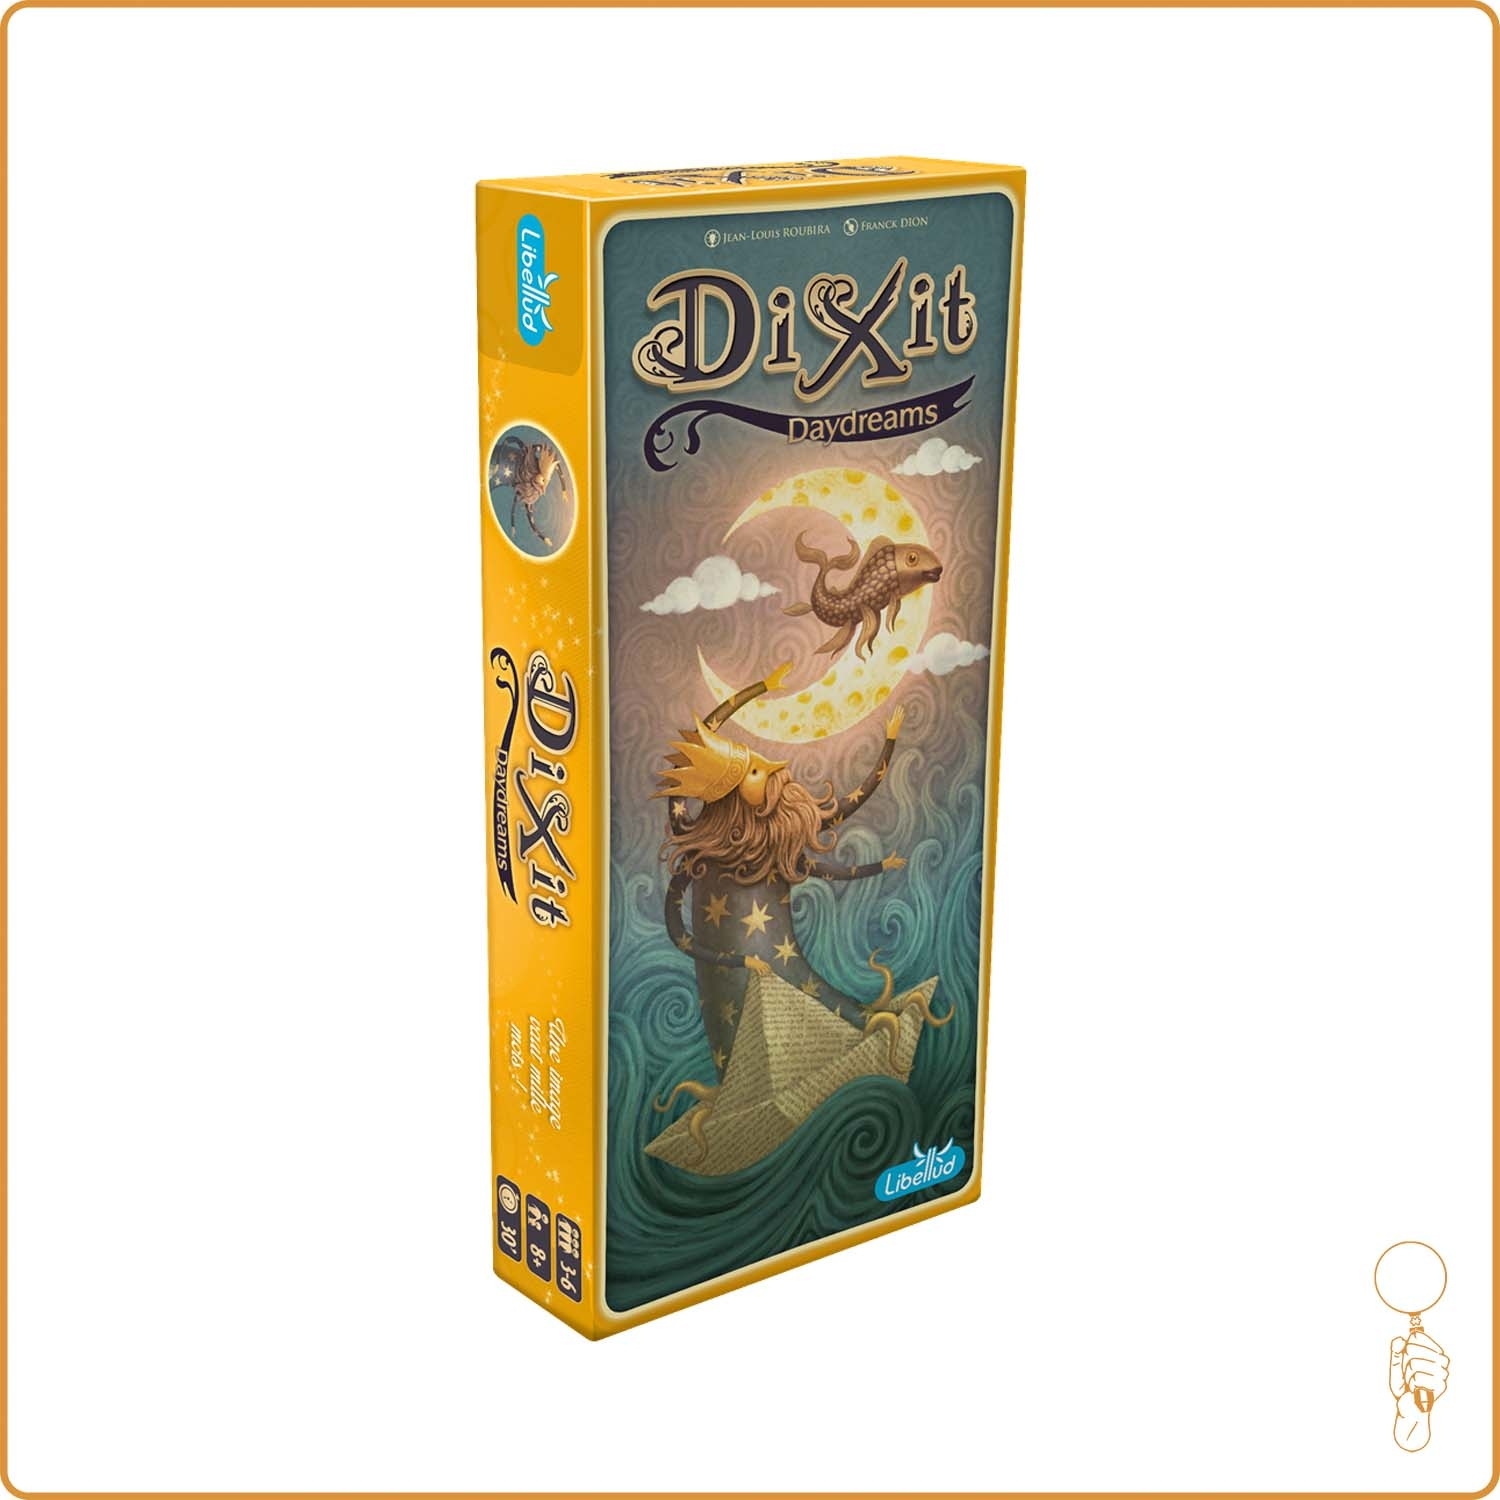 Gestion - Dixit - Extension 5 - Day dreams Libellud - 1